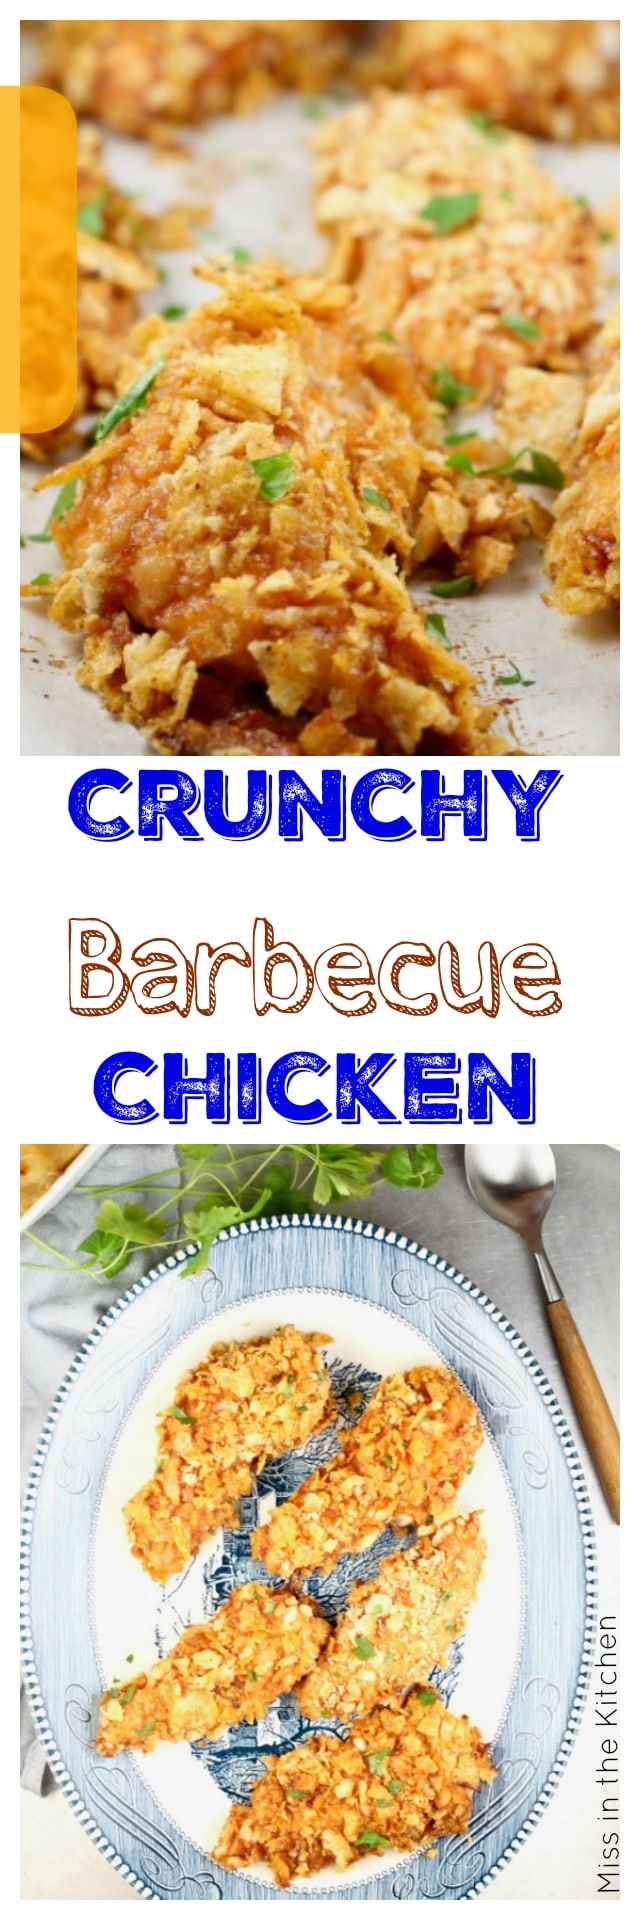 Crunchy Barbecue Chicken Tenders - Miss in the Kitchen